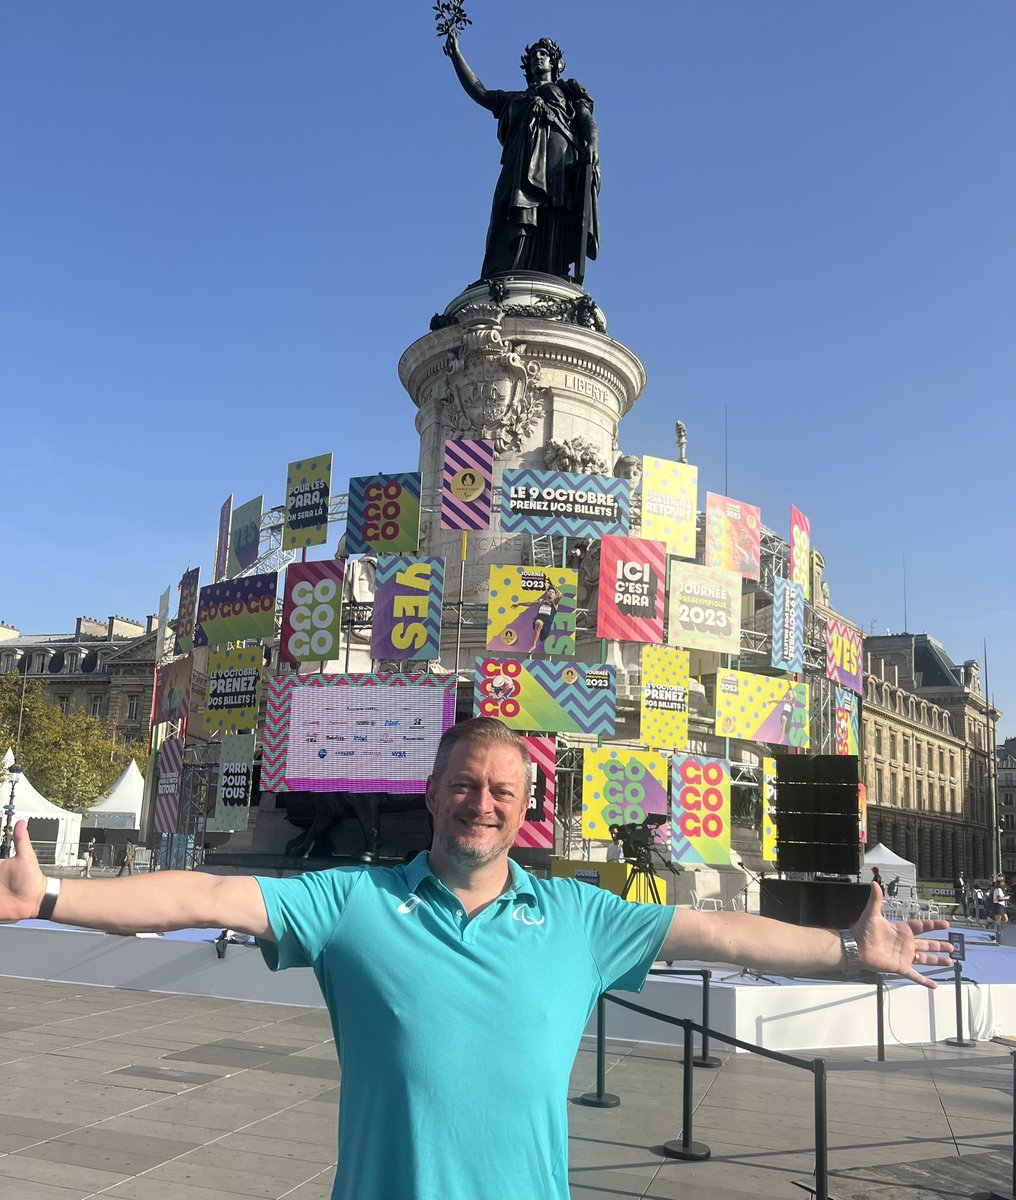 Looking forward to a fantastic Paralympic Day, here at Place de la Republique, in Paris. Come and enjoy an exciting day with us. Try-outs, top Paralympians, artistic performances. You don’t wanna miss it. Be part of it! @paralympics @paris2024 #journéeparalympique #ParalympicDay